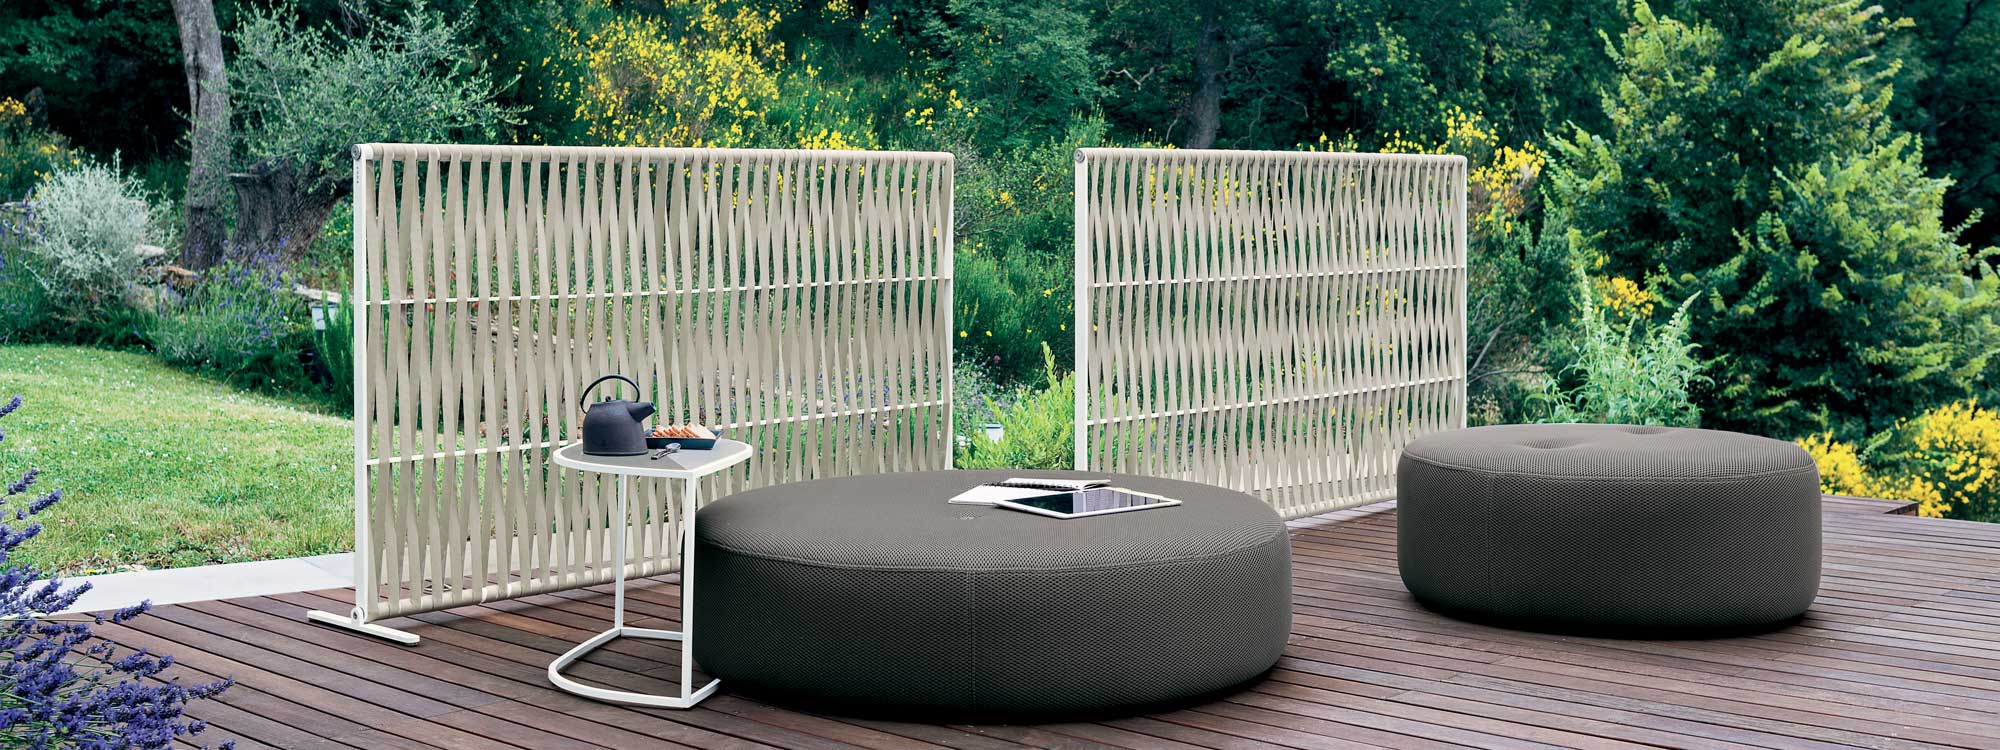 Image of milk-colored Wing outdoor screens by RODA, together with Double round outdoor pouf and Leaf minimalist garden side table